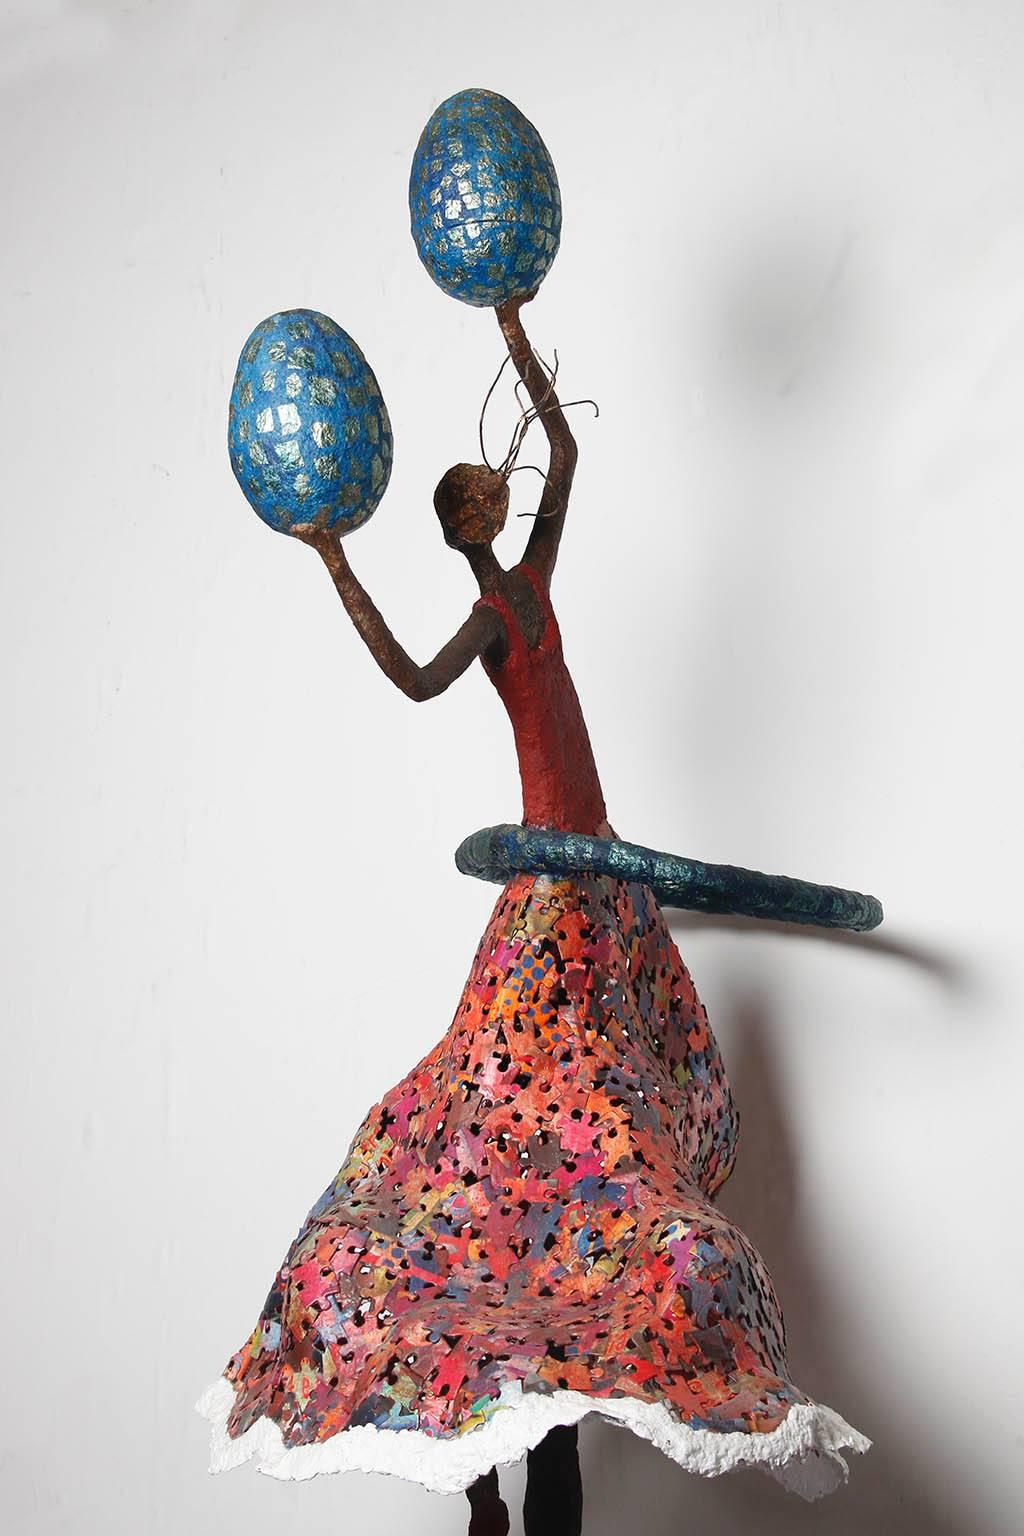 Arts and Crafts 21st Century Blue and Red Sculpture by Mexican Artist Miriam Ladron De Guevara